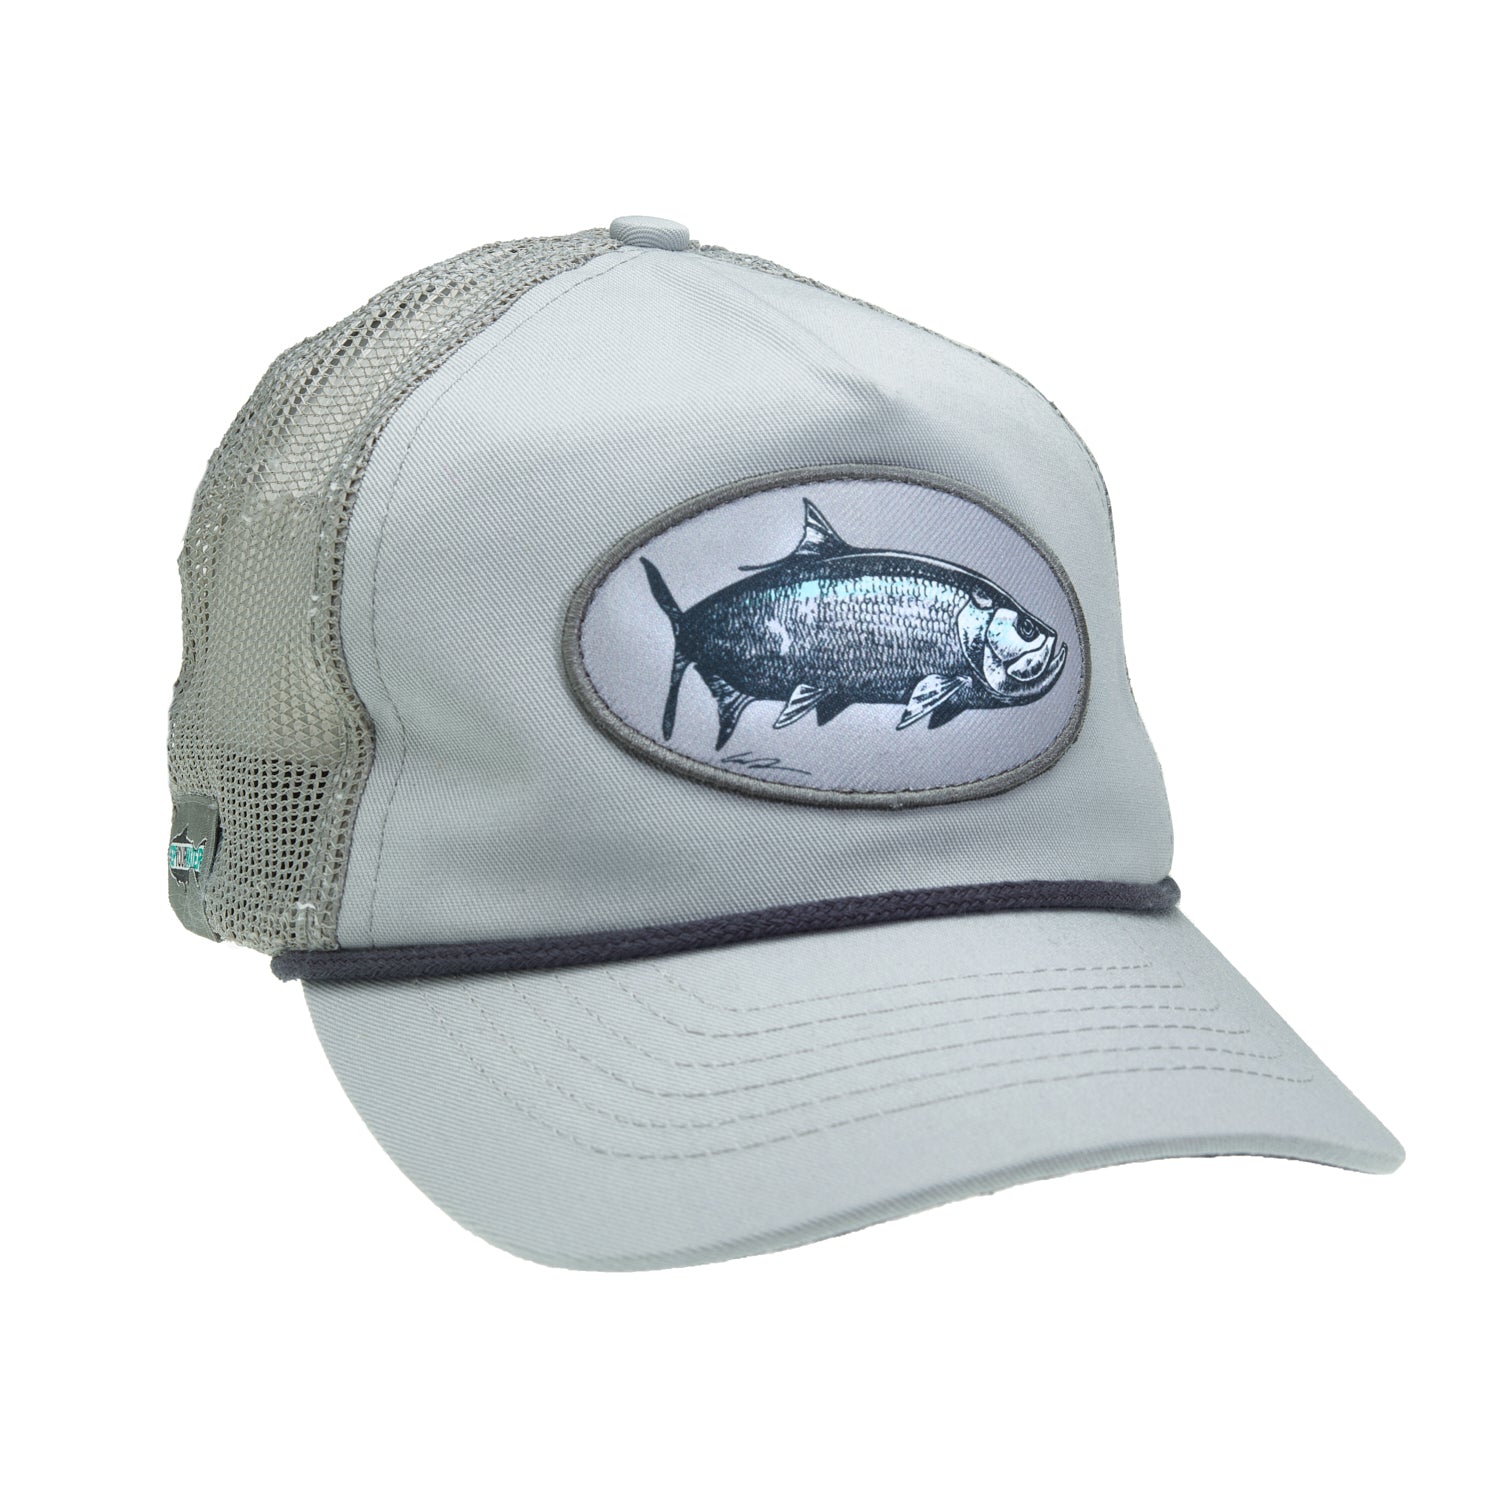 A hat with gray mesh and gray fabric in front has an oval shaped patch with a tarpon on it.  There is a black rope above the brim